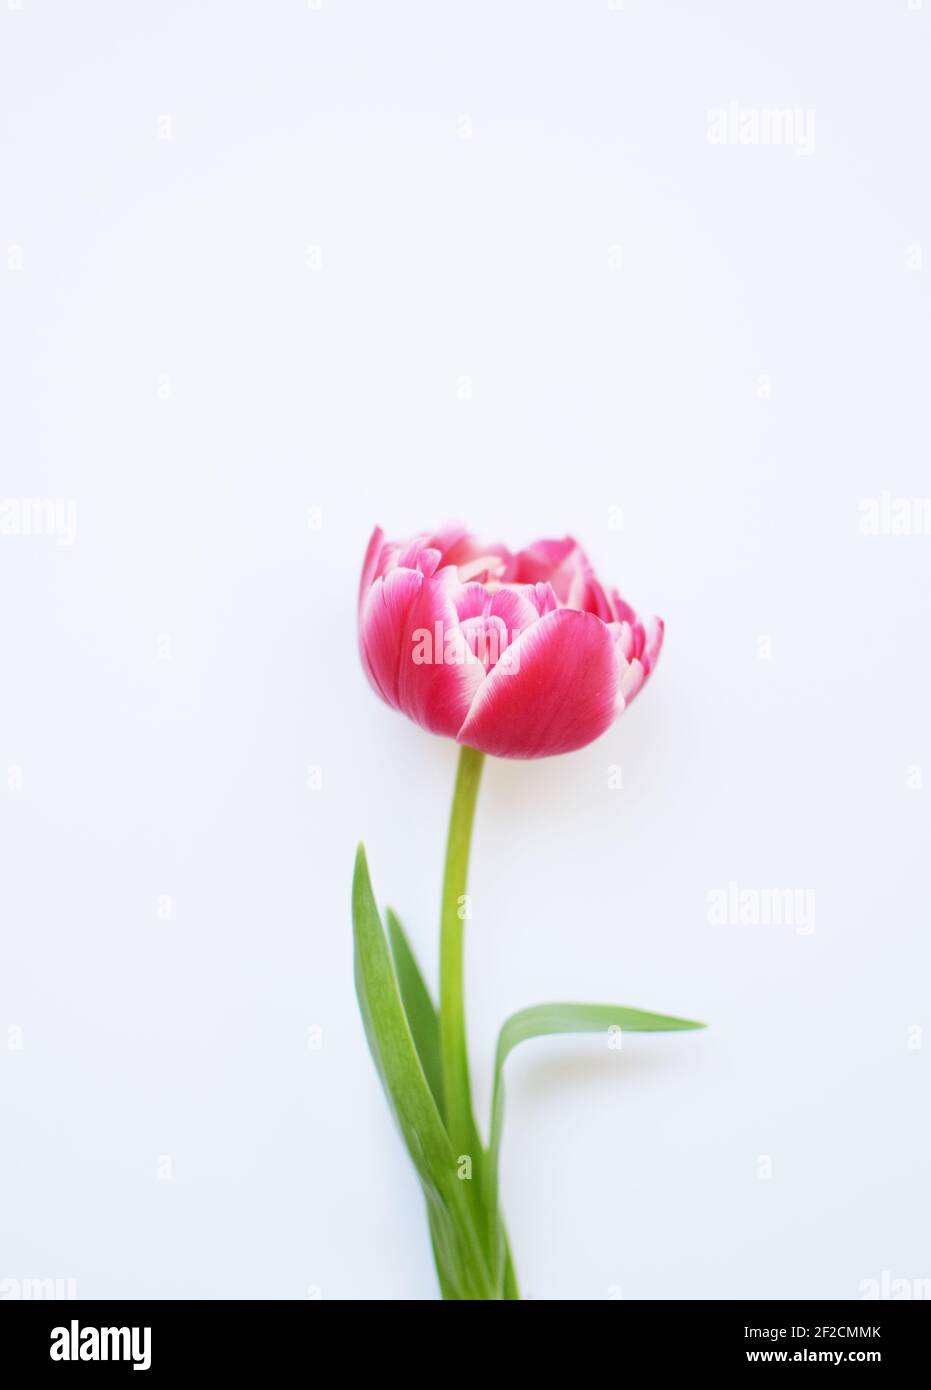 One delicate peony red tulip with green leaves on a pink background. Stock Photo